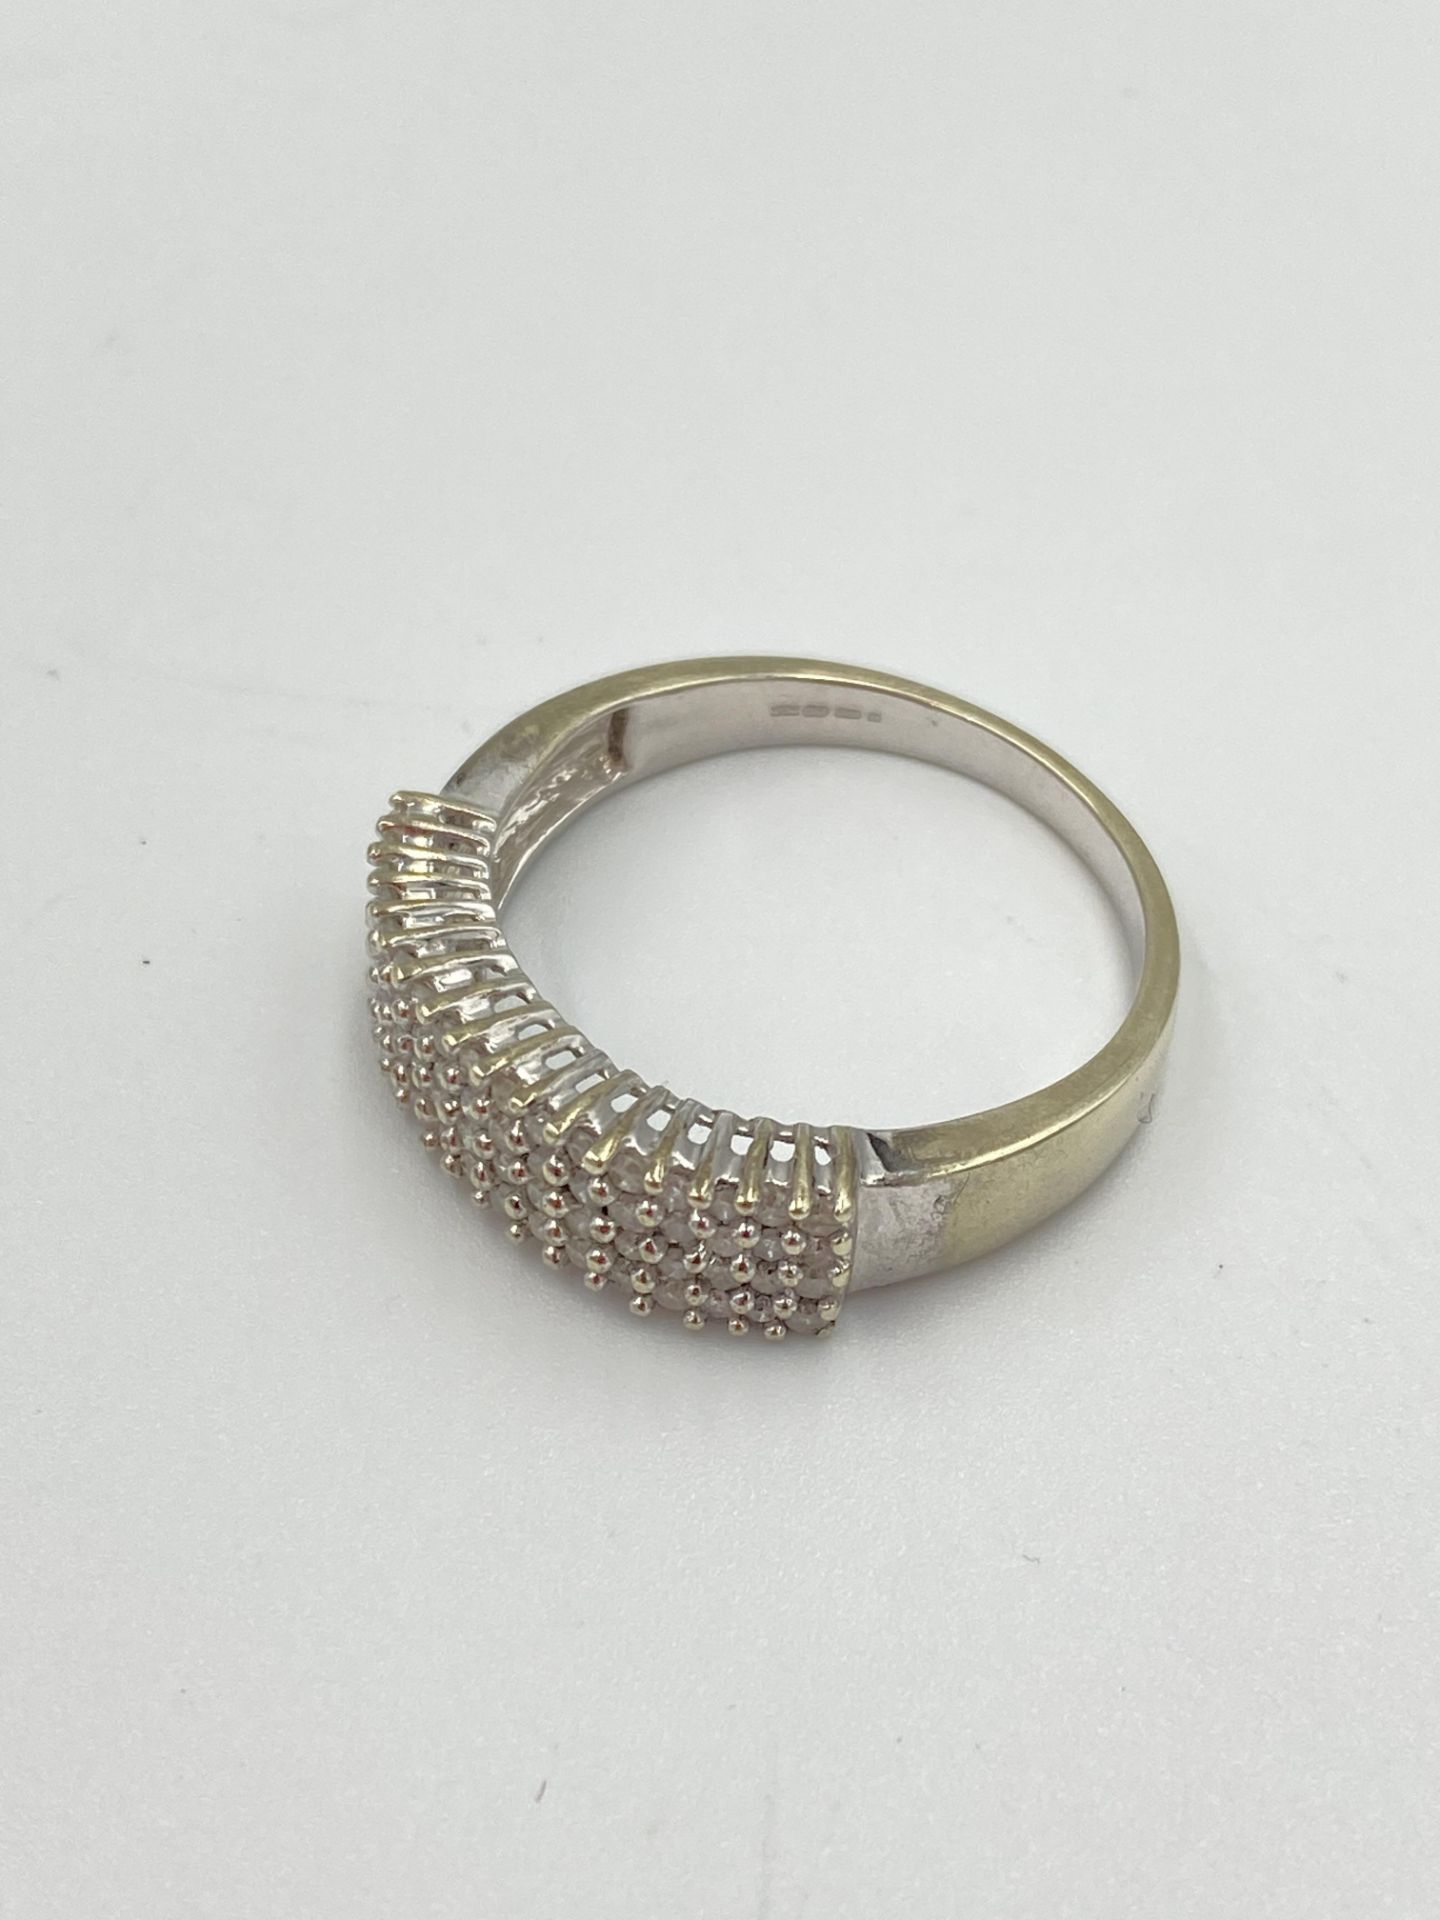 9ct white gold and diamond ring - Image 2 of 6